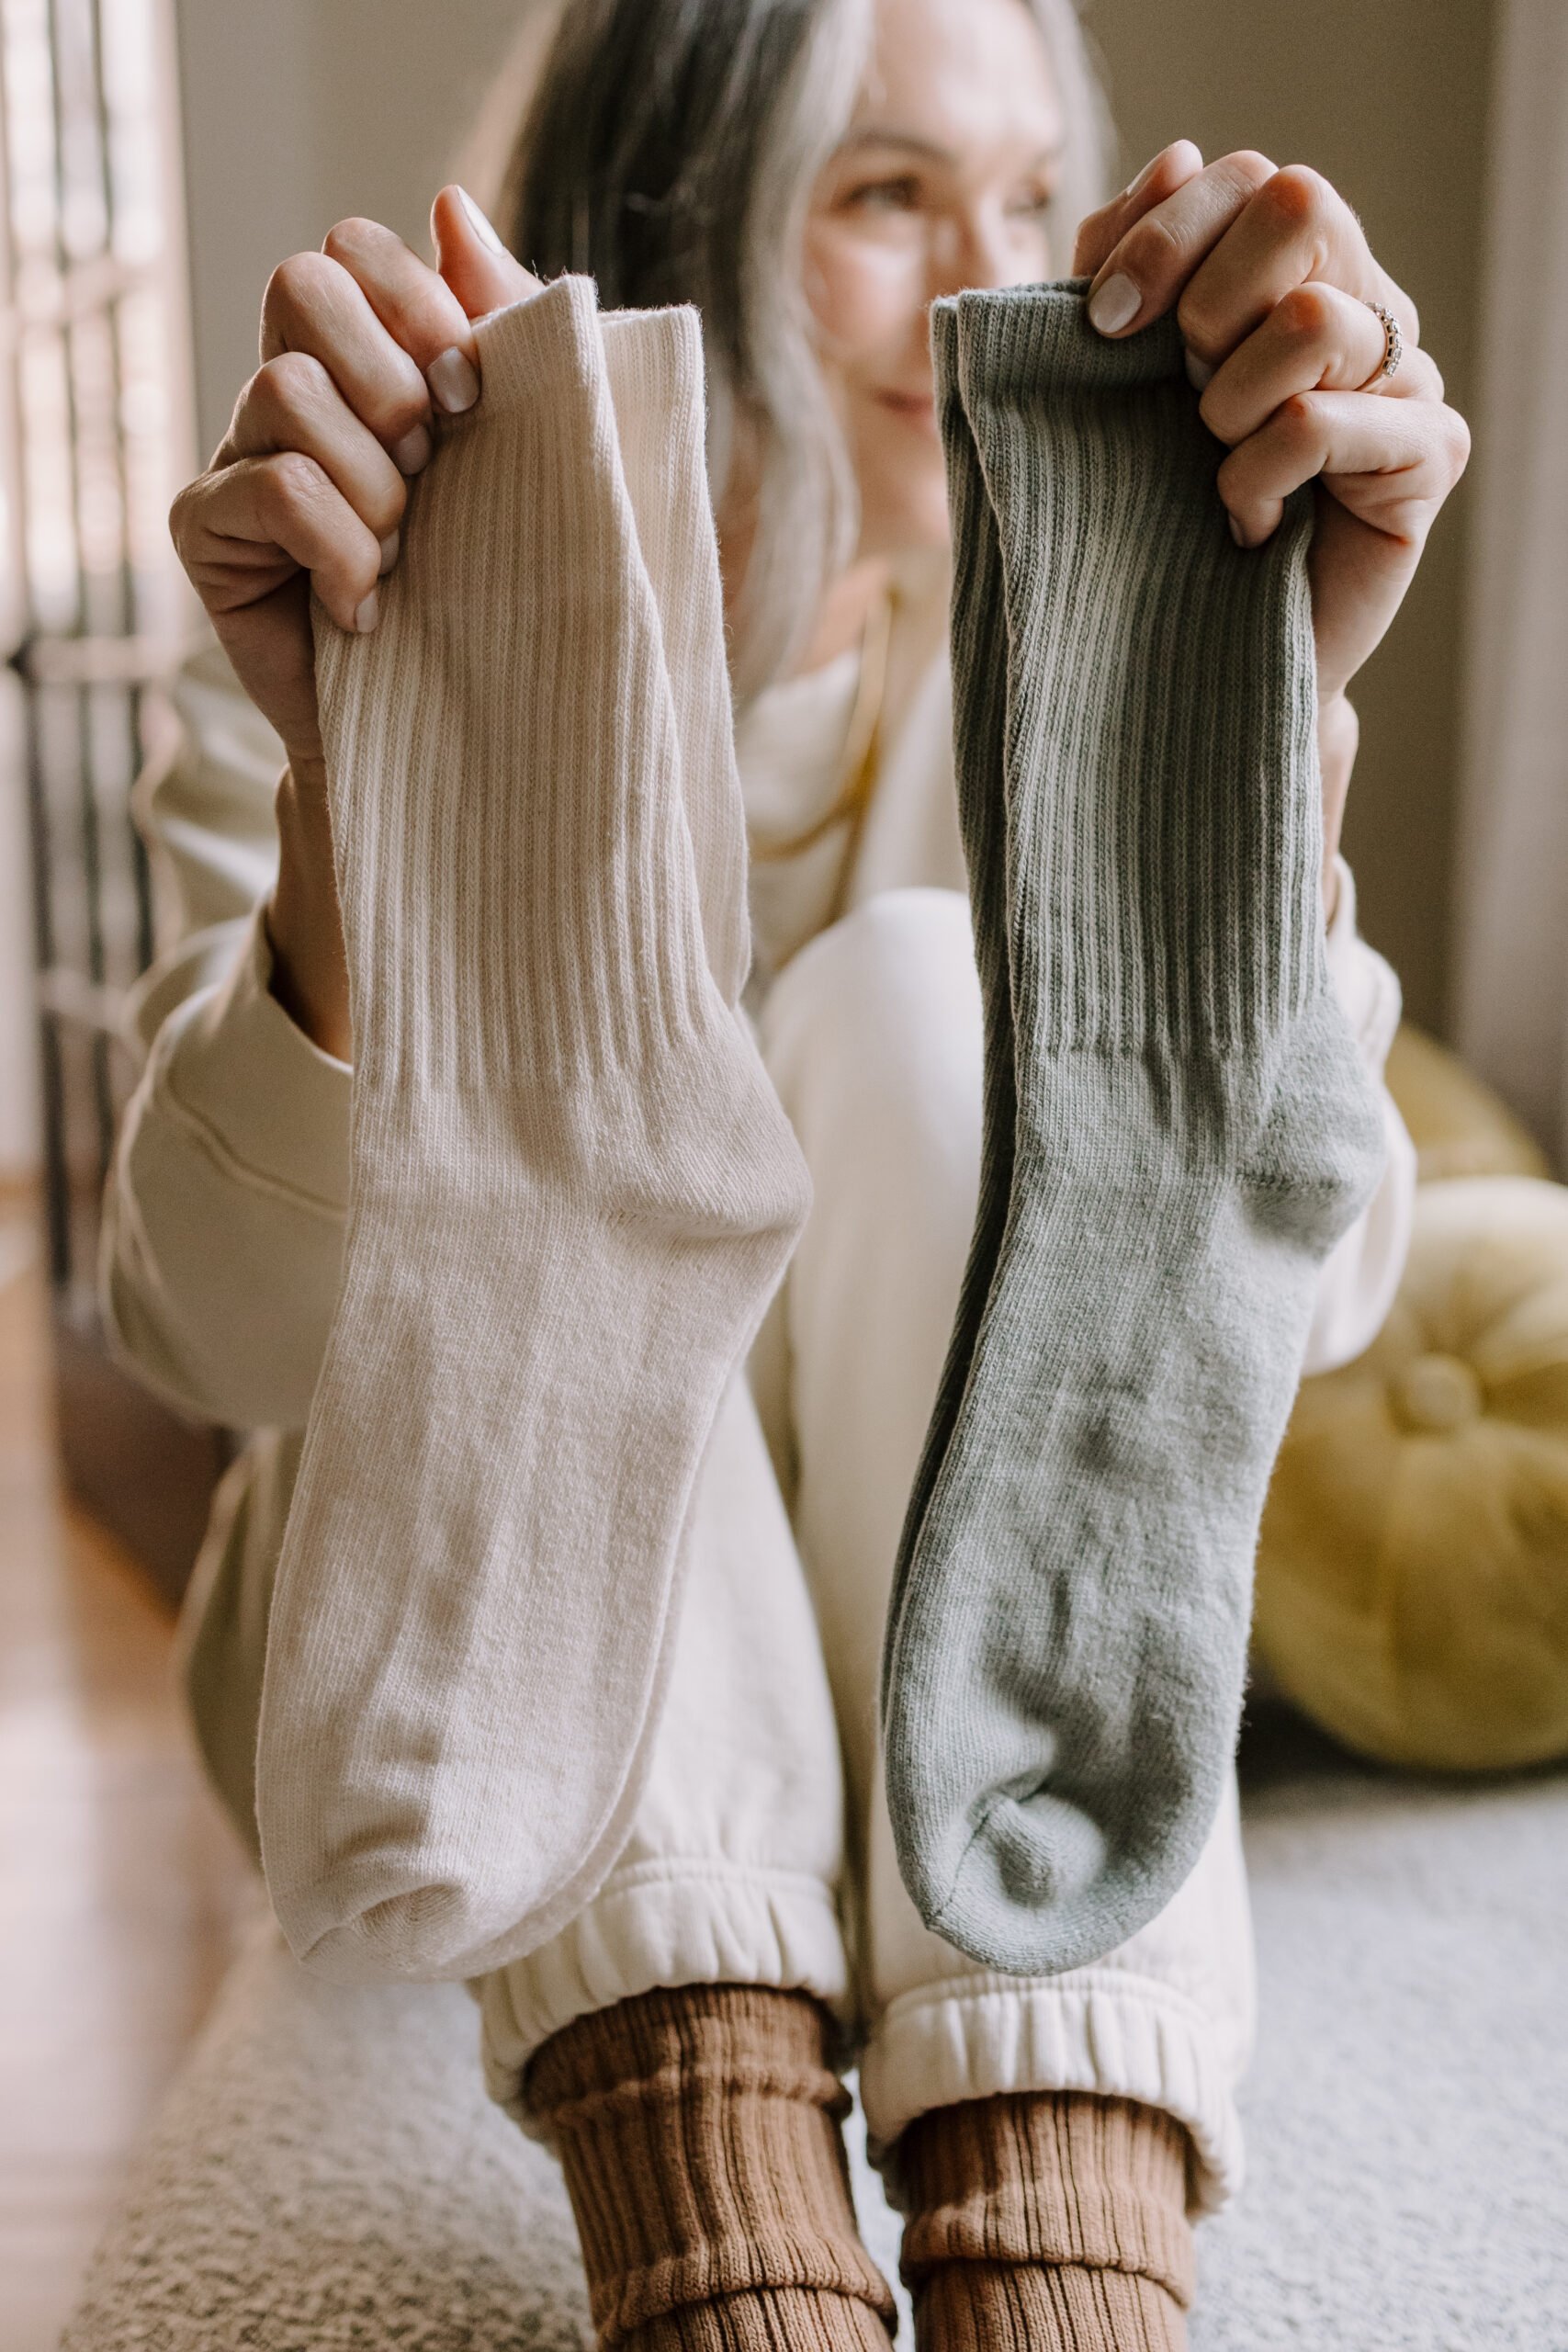 A woman holding up two pairs of socks.